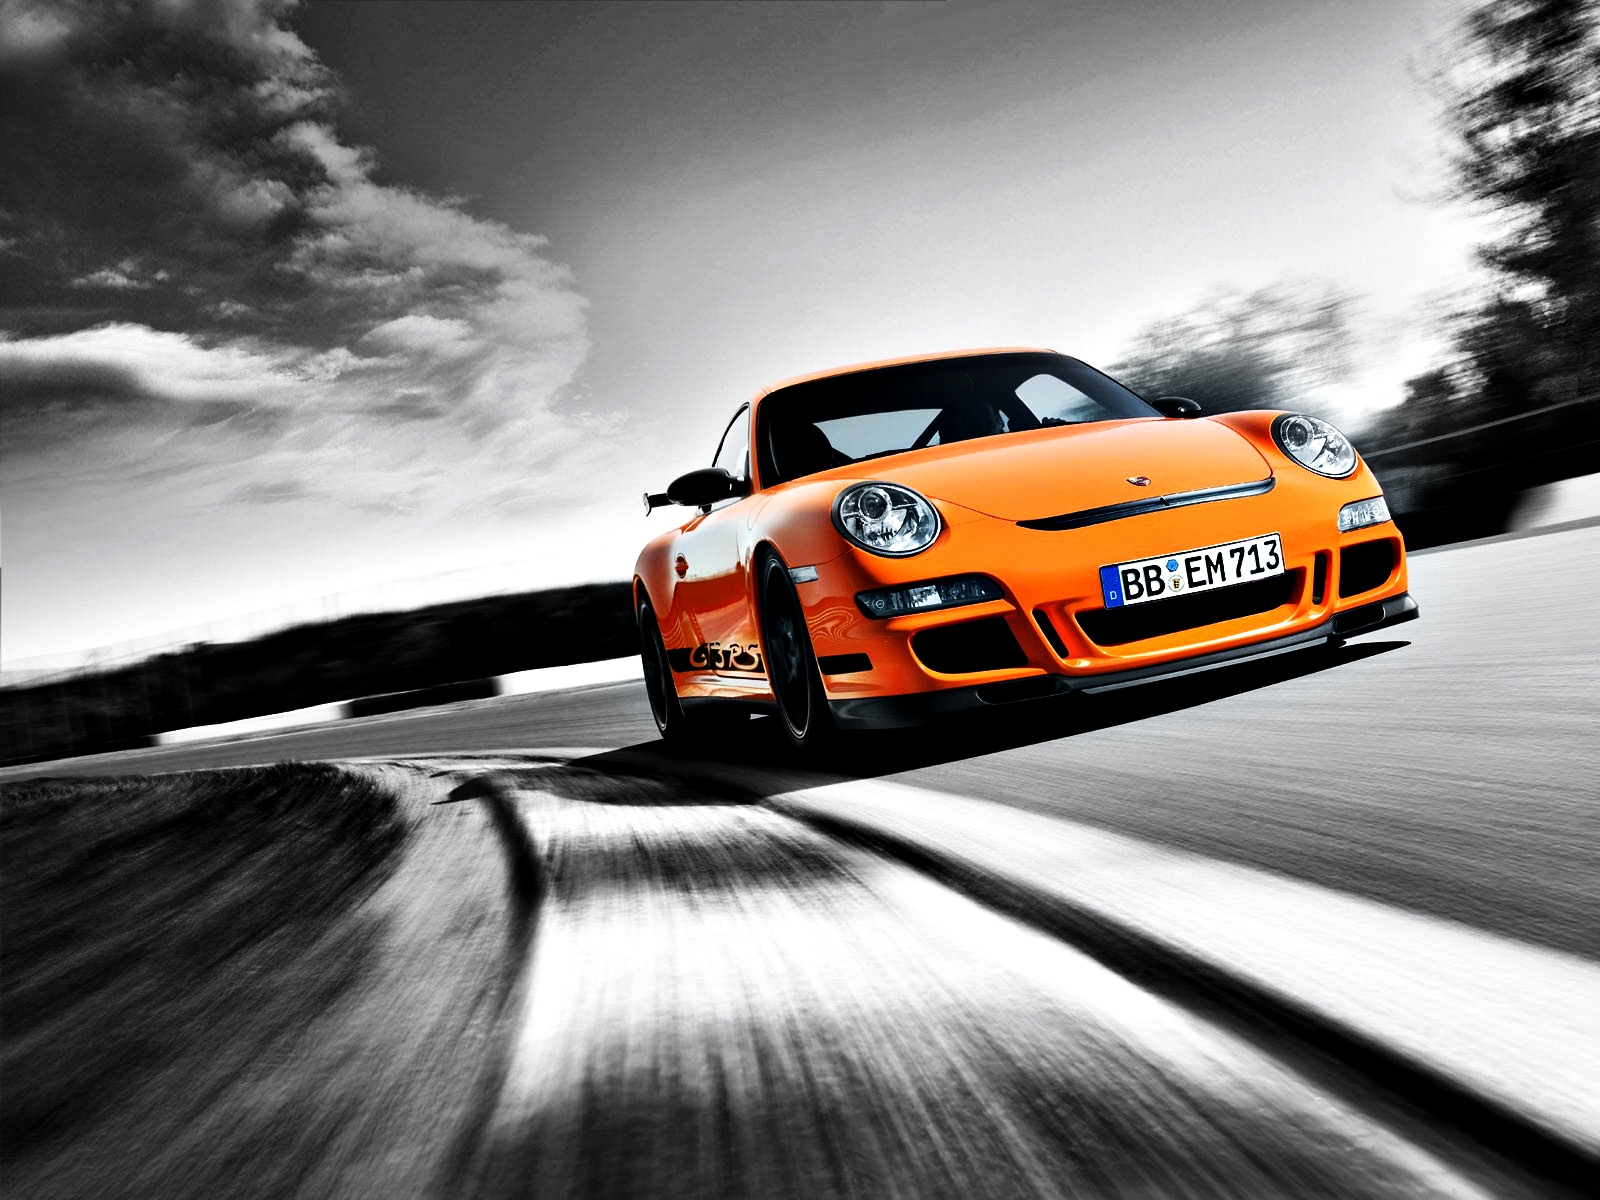 HD car Wallpapers is the no1 source of Car wallpapers